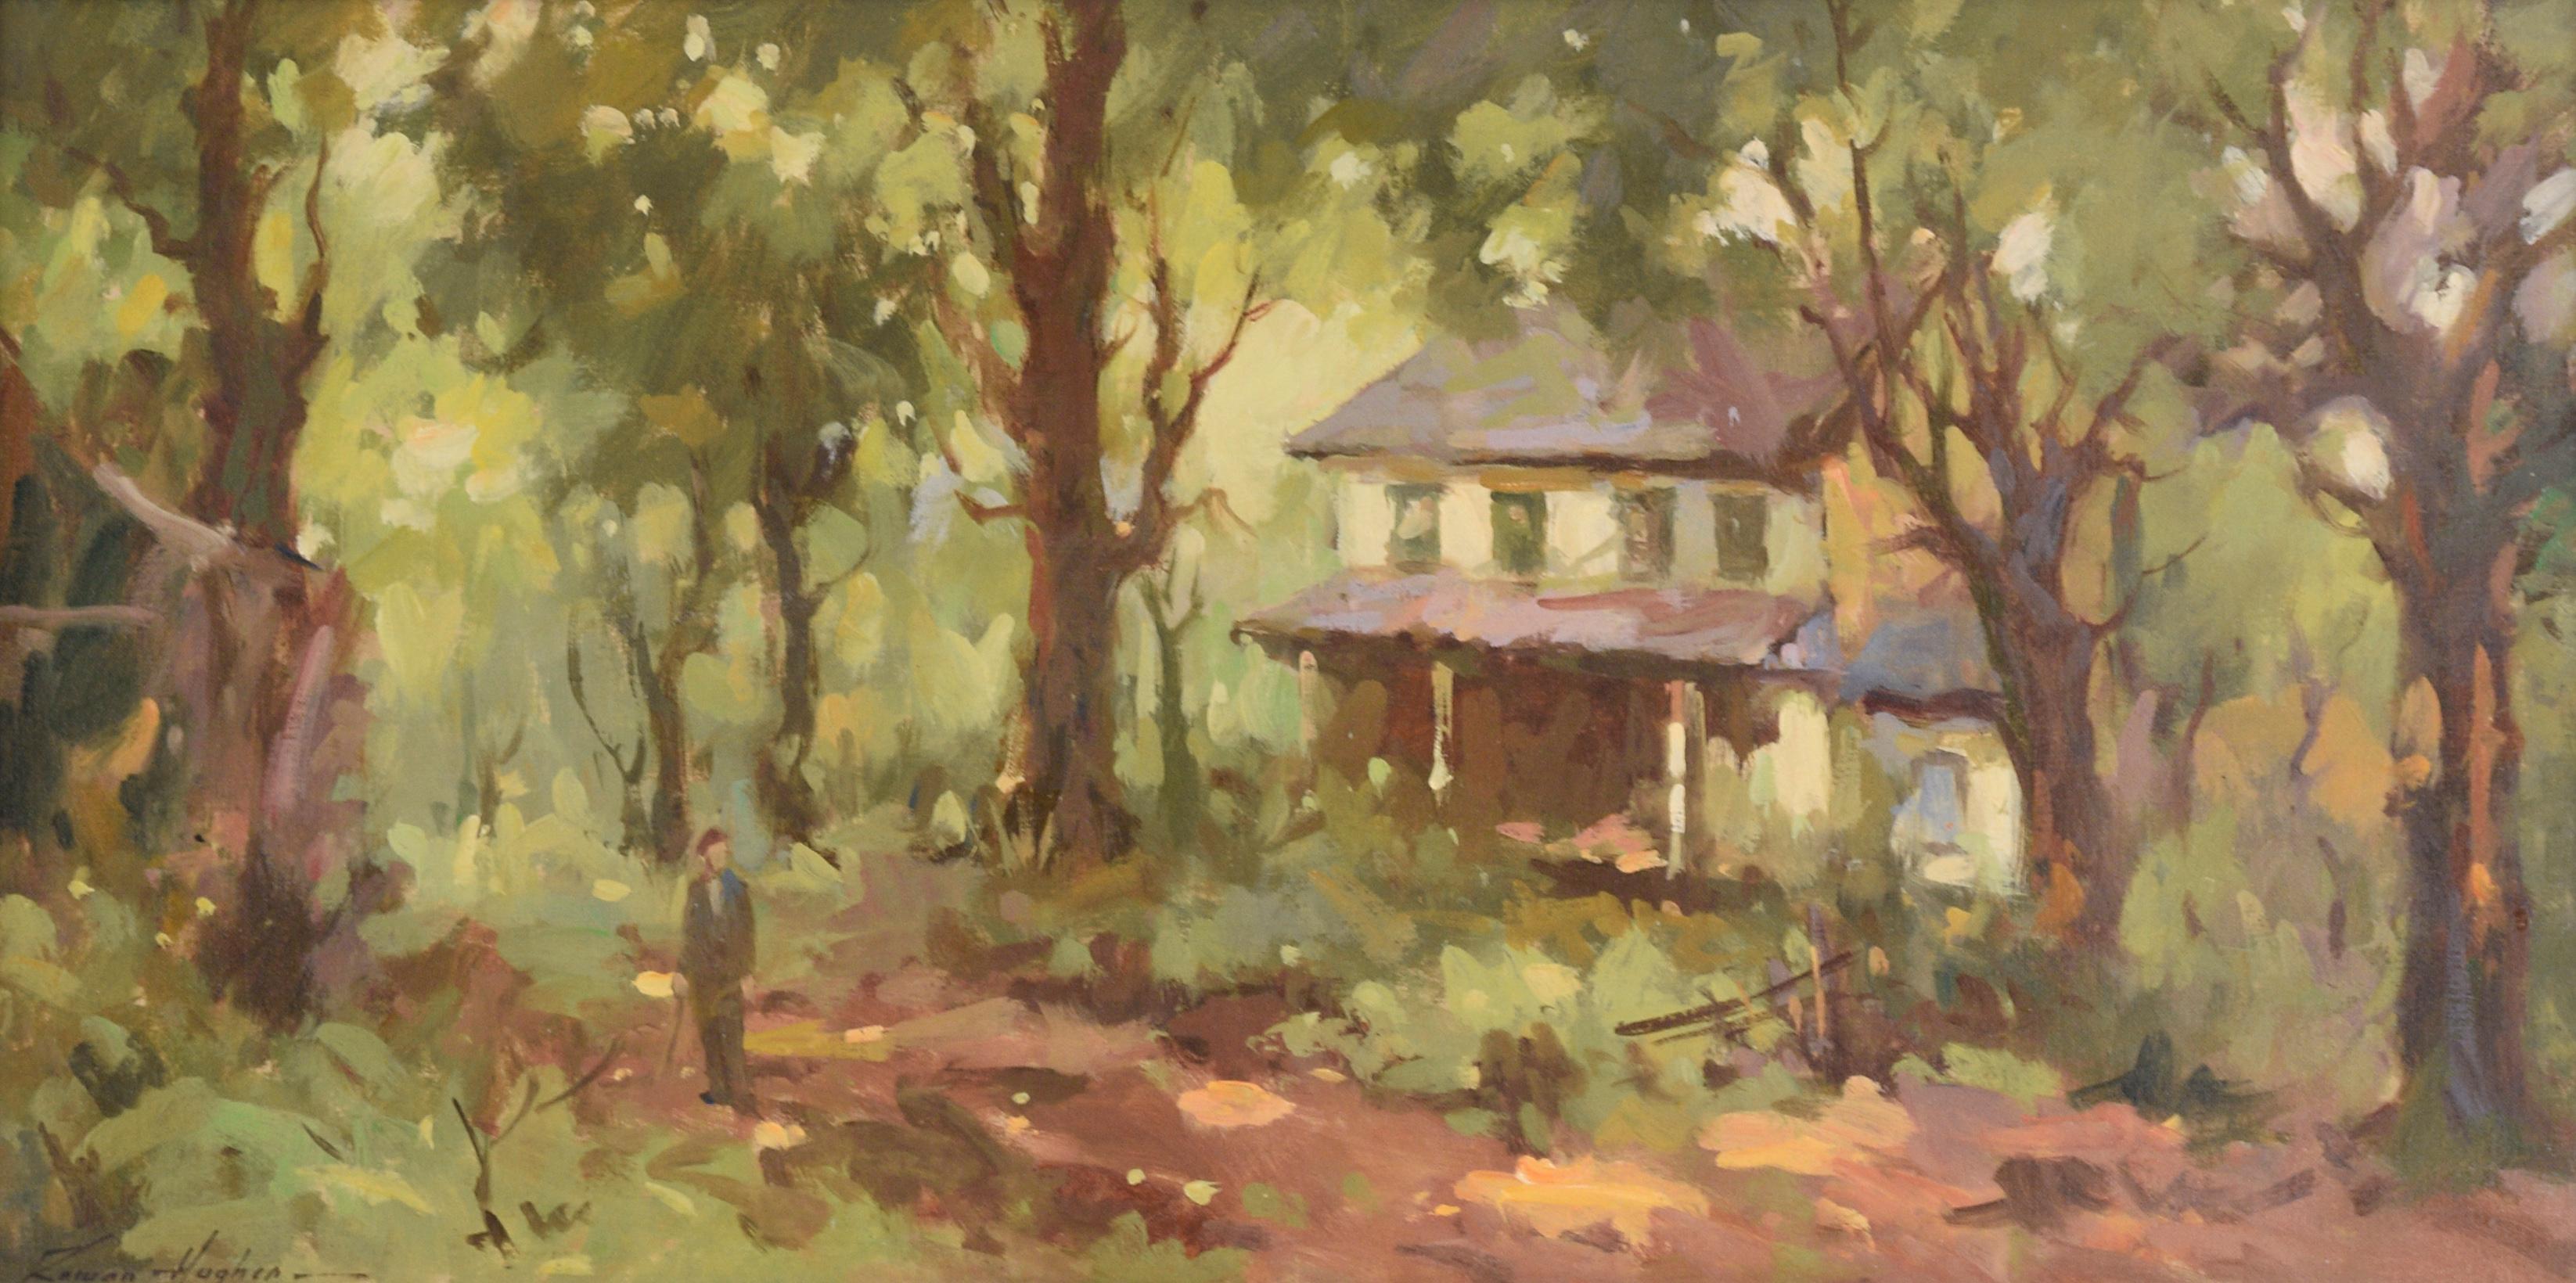 Harold Rowan Hughes Figurative Painting - House in the Woods, Mid Century Horizontal Figural Landscape with Trees 